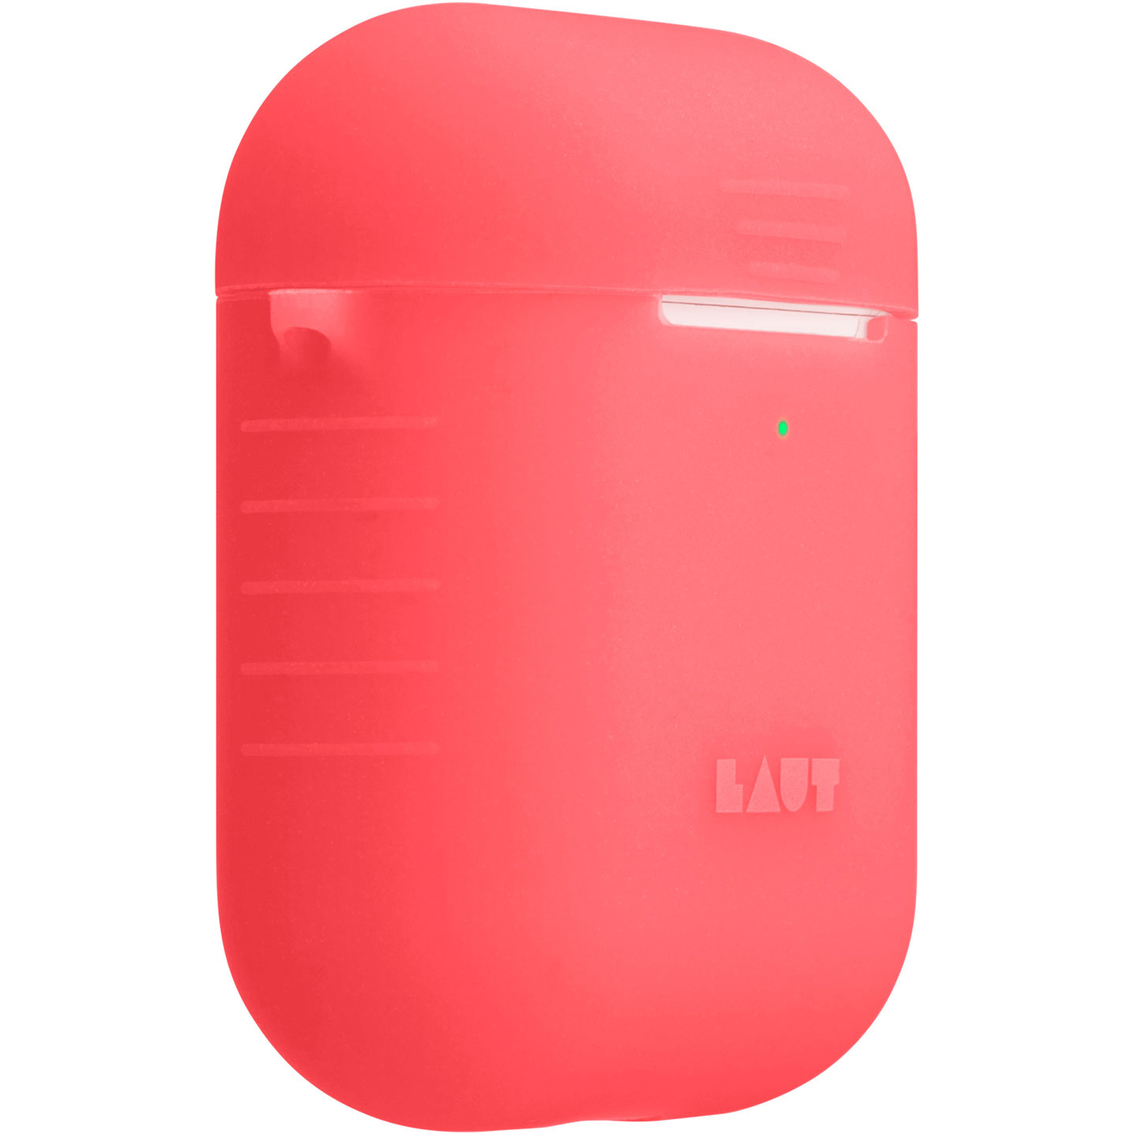 Laut Pod Neon Case for Apple AirPods - Image 3 of 5